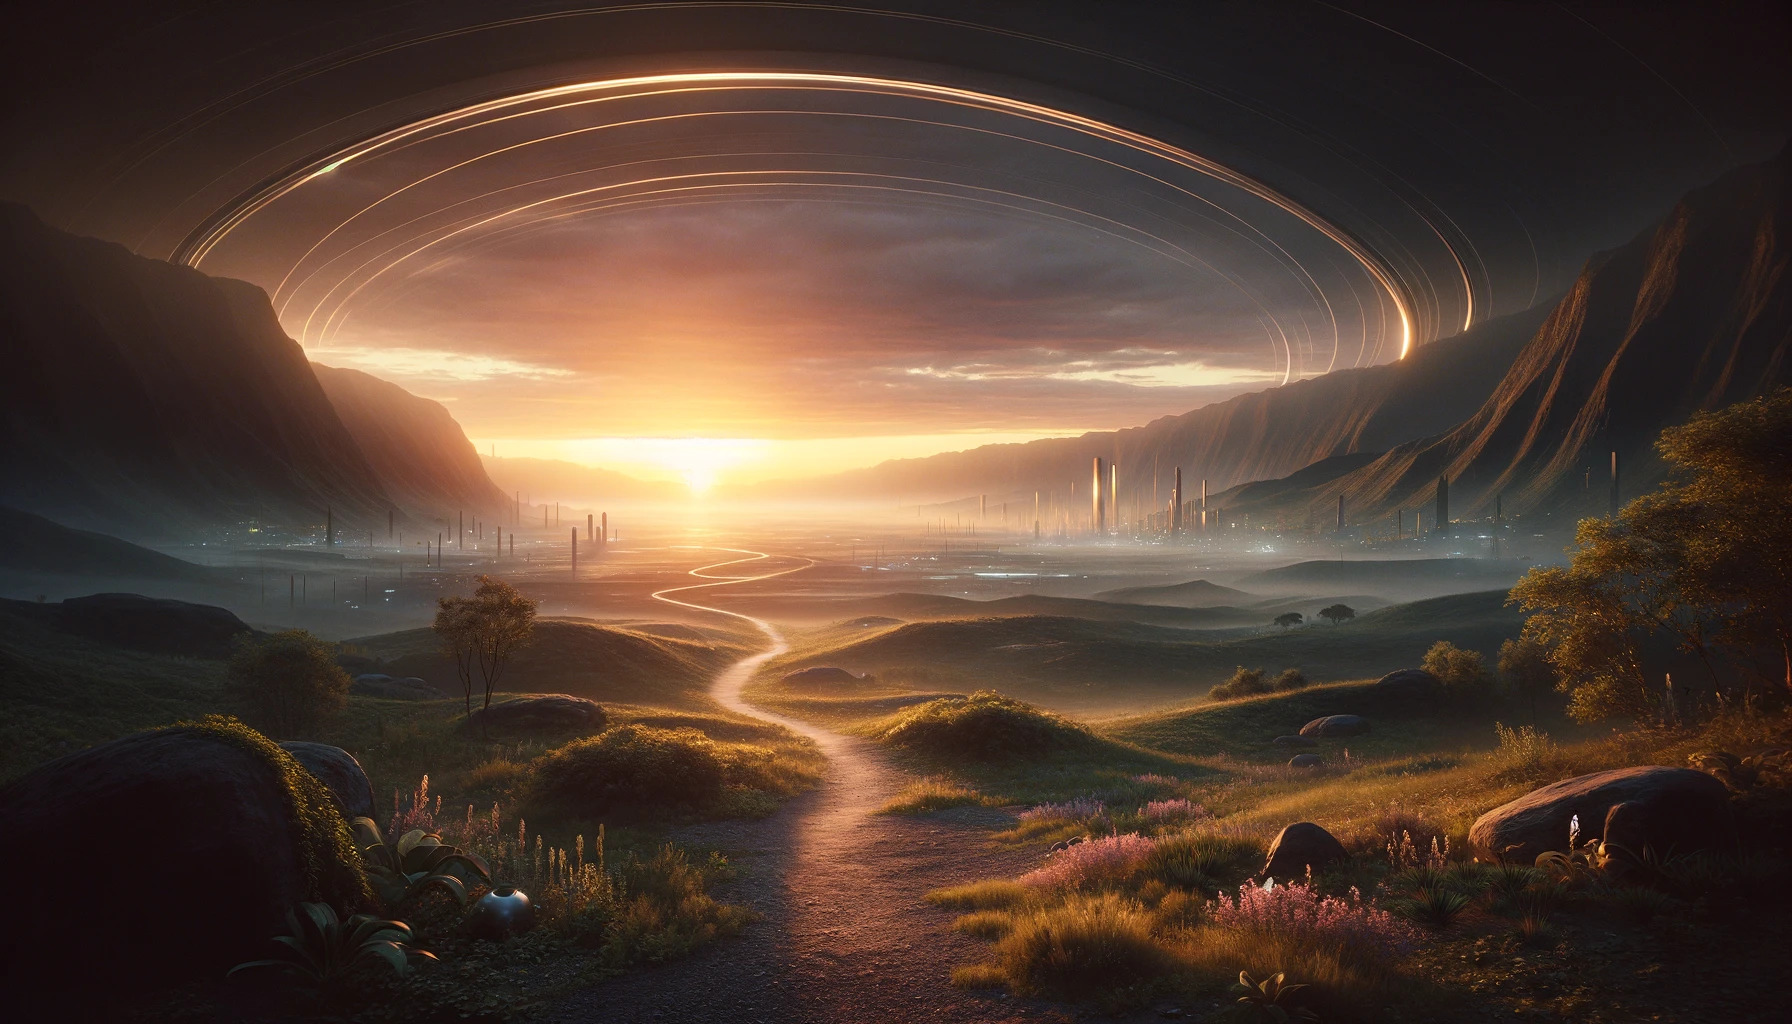 The cinematic image inspired by the concept of "100 Days From Today" has been created, capturing the essence of anticipation, the passage of time, and the journey towards the future at the break of dawn.